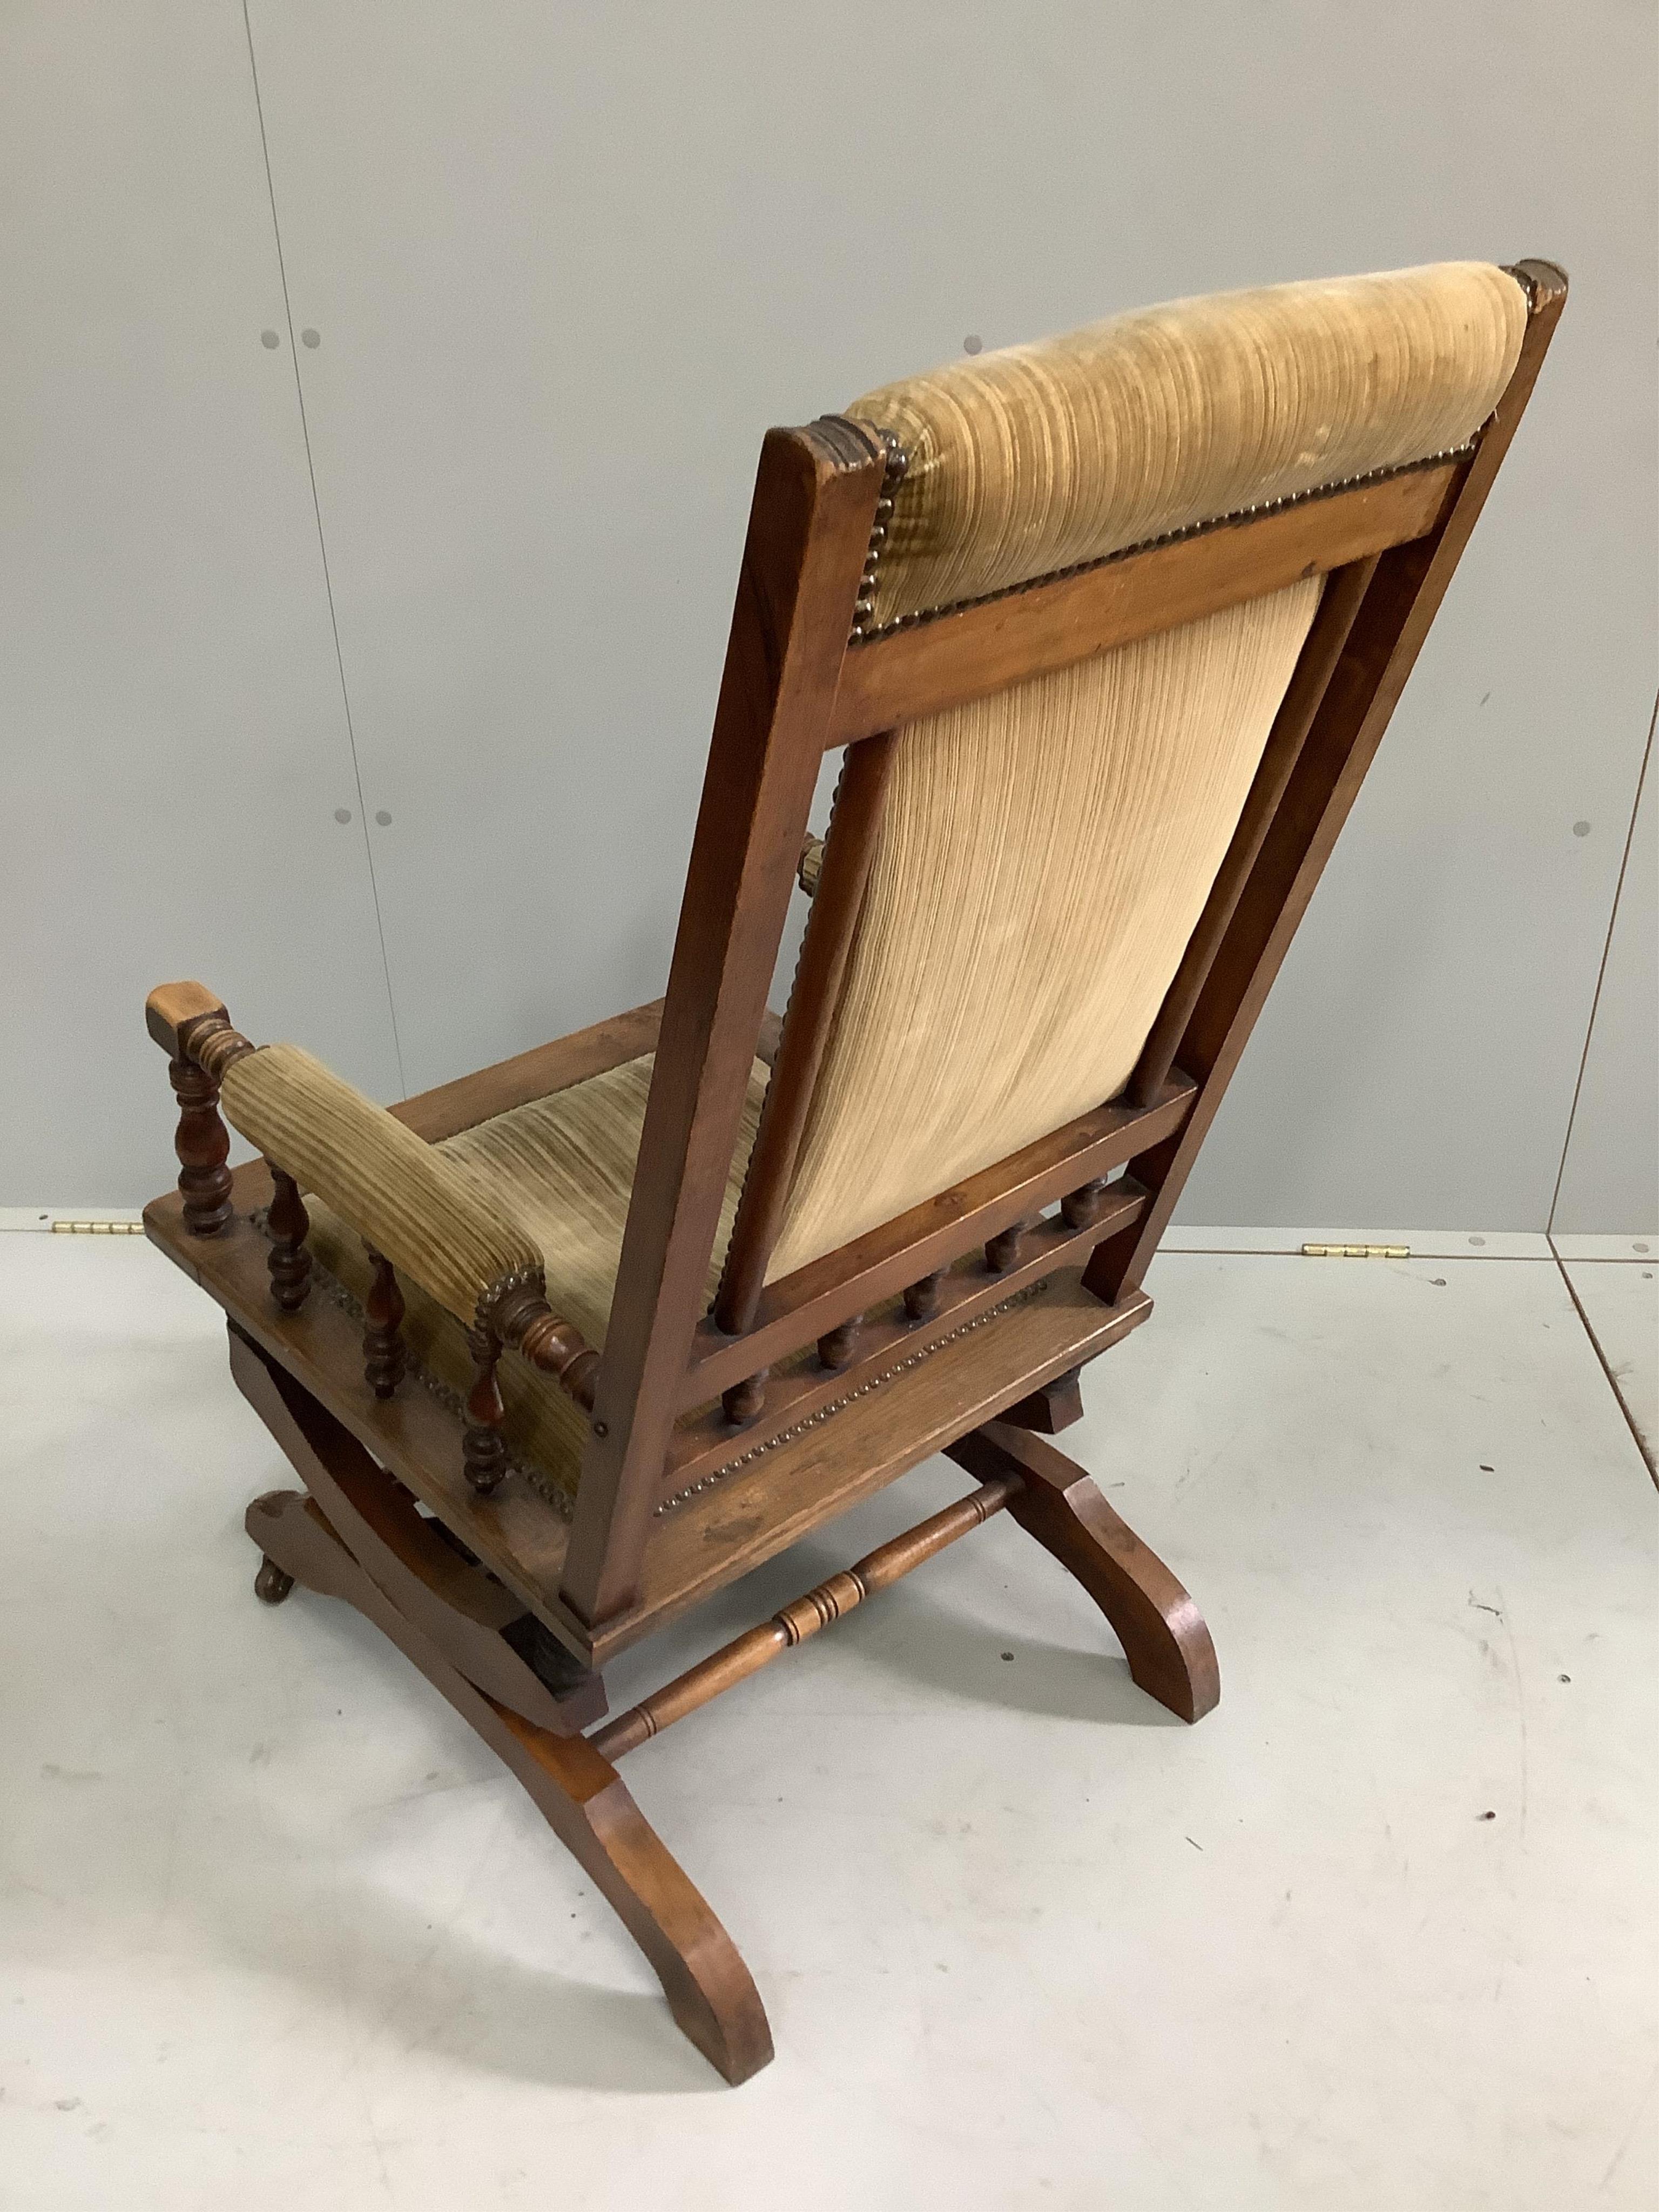 A late 19th century American oak and beech upholstered rocking chair, width 58cm, depth 54cm, height 106cm. Condition - fair